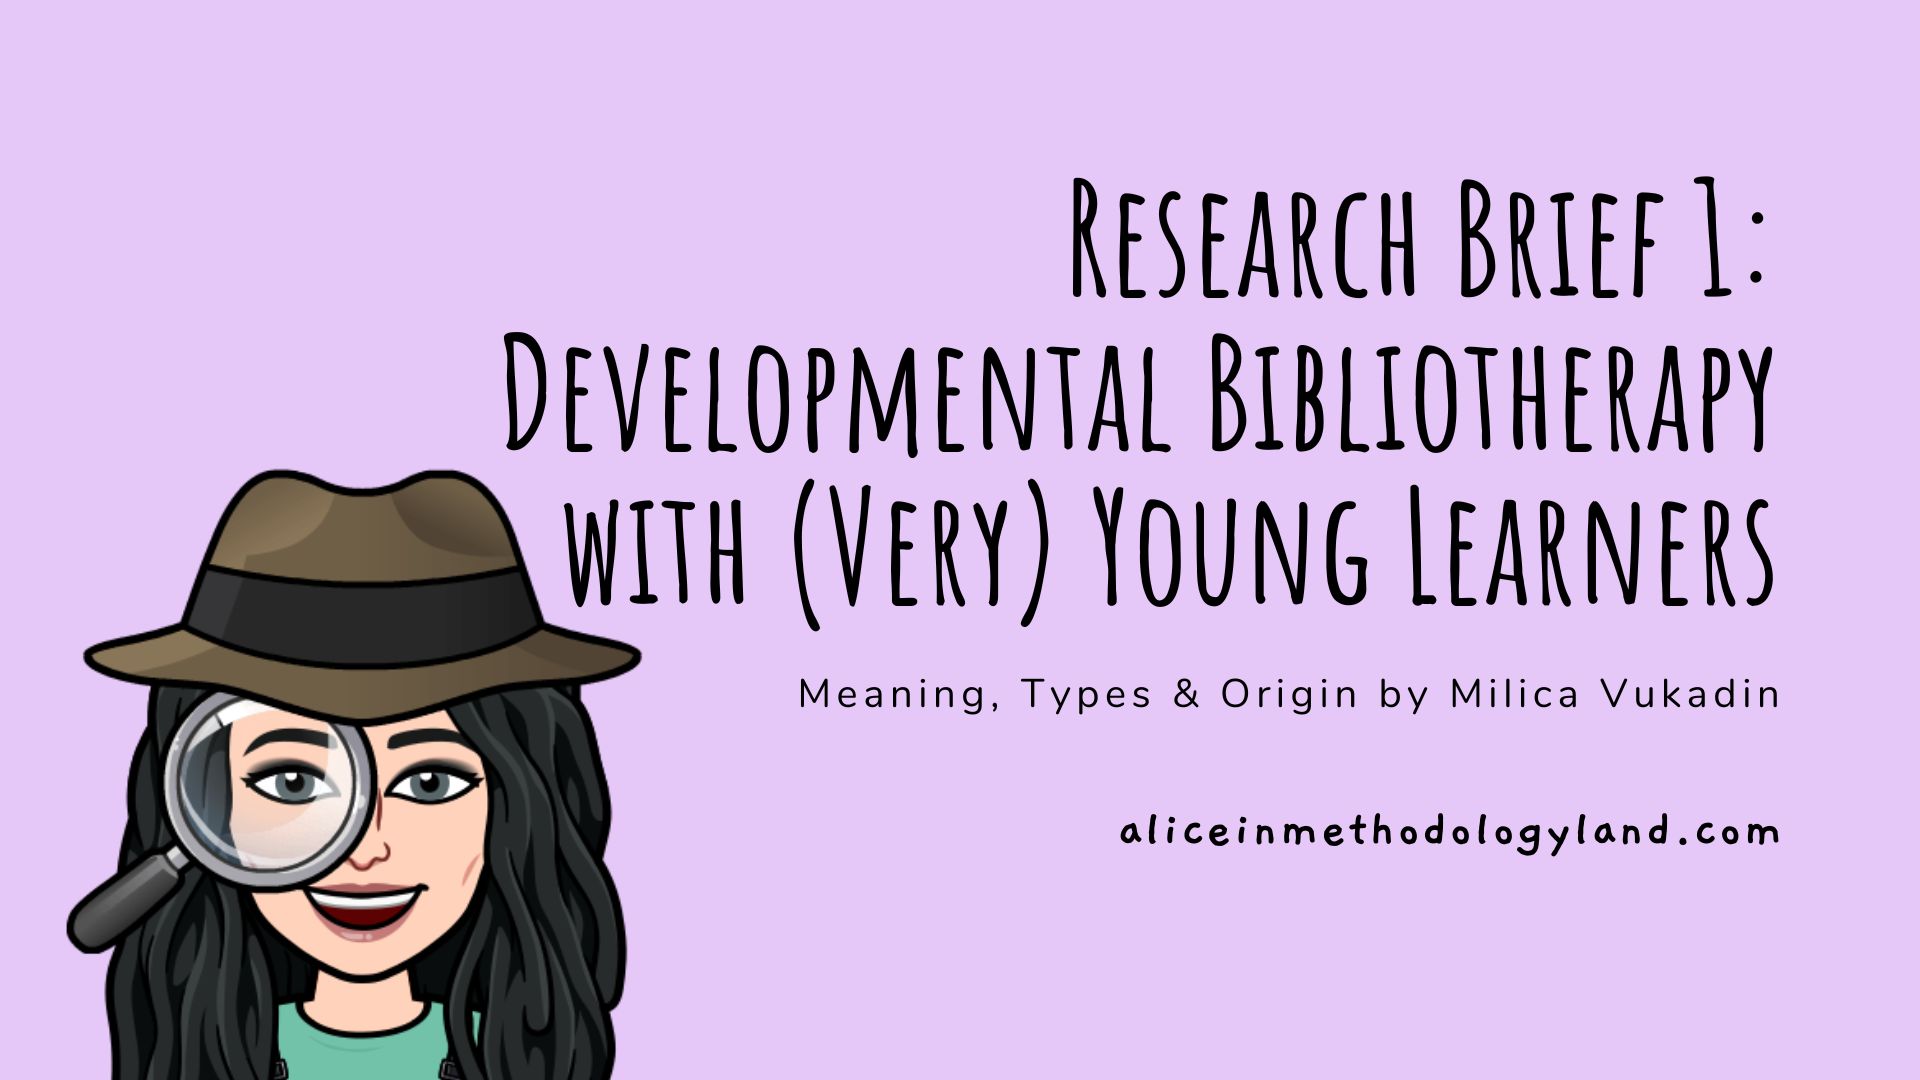 Research Brief 1: Developmental Bibliotherapy with (Very) Young Learners – Meaning, Types & Origin by Milica Vukadin￼